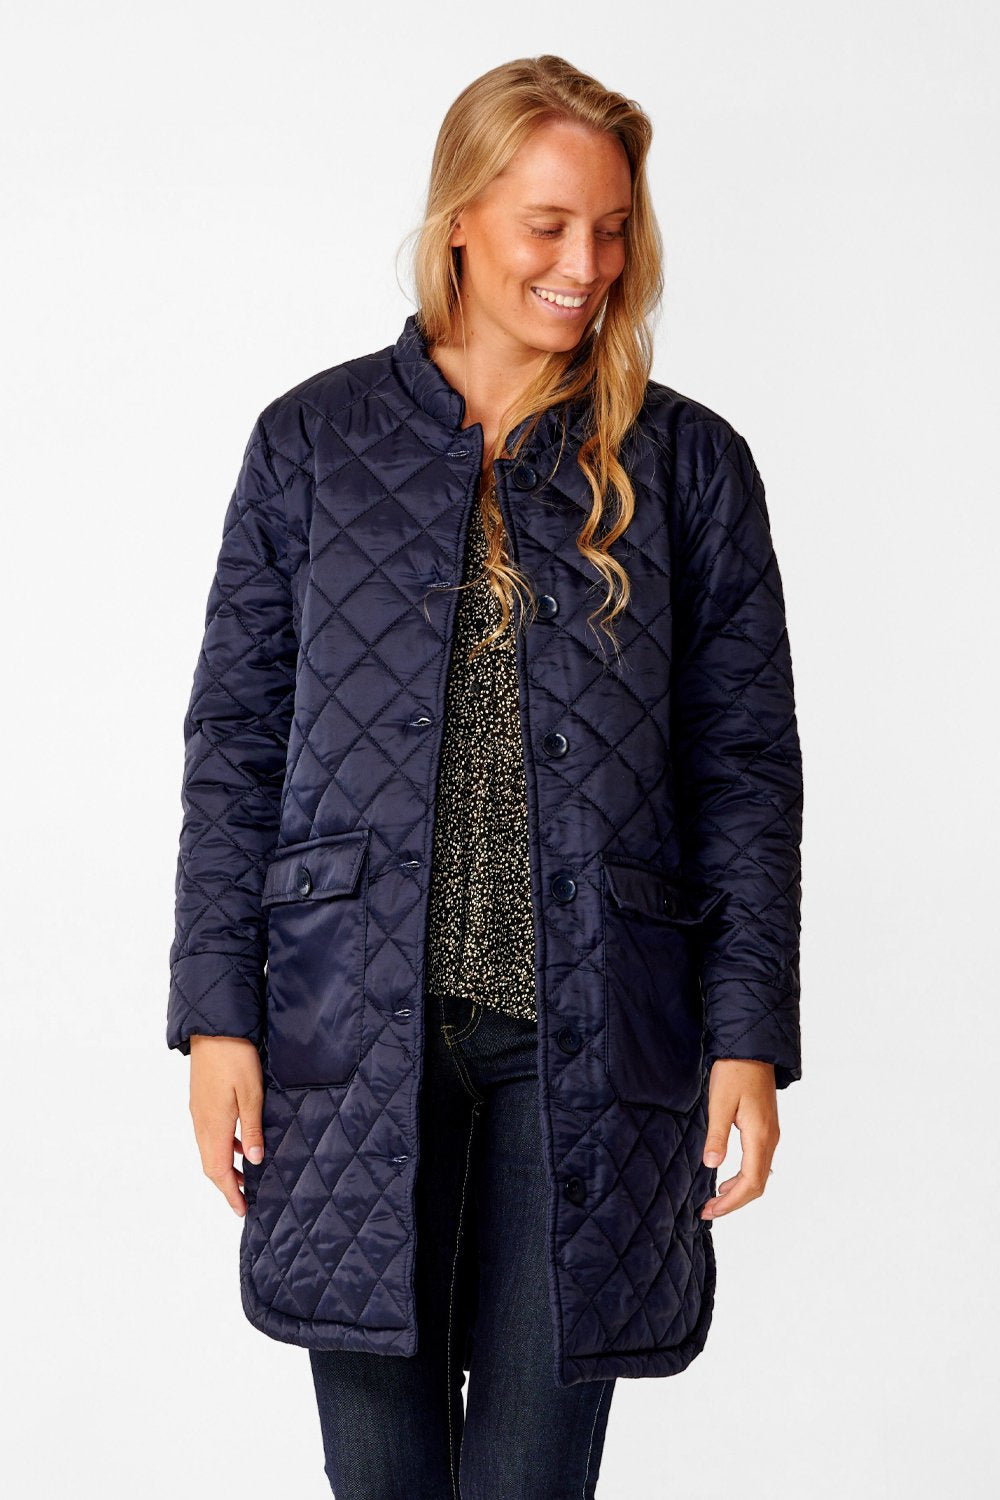 Rai Jacket Quilted Navy